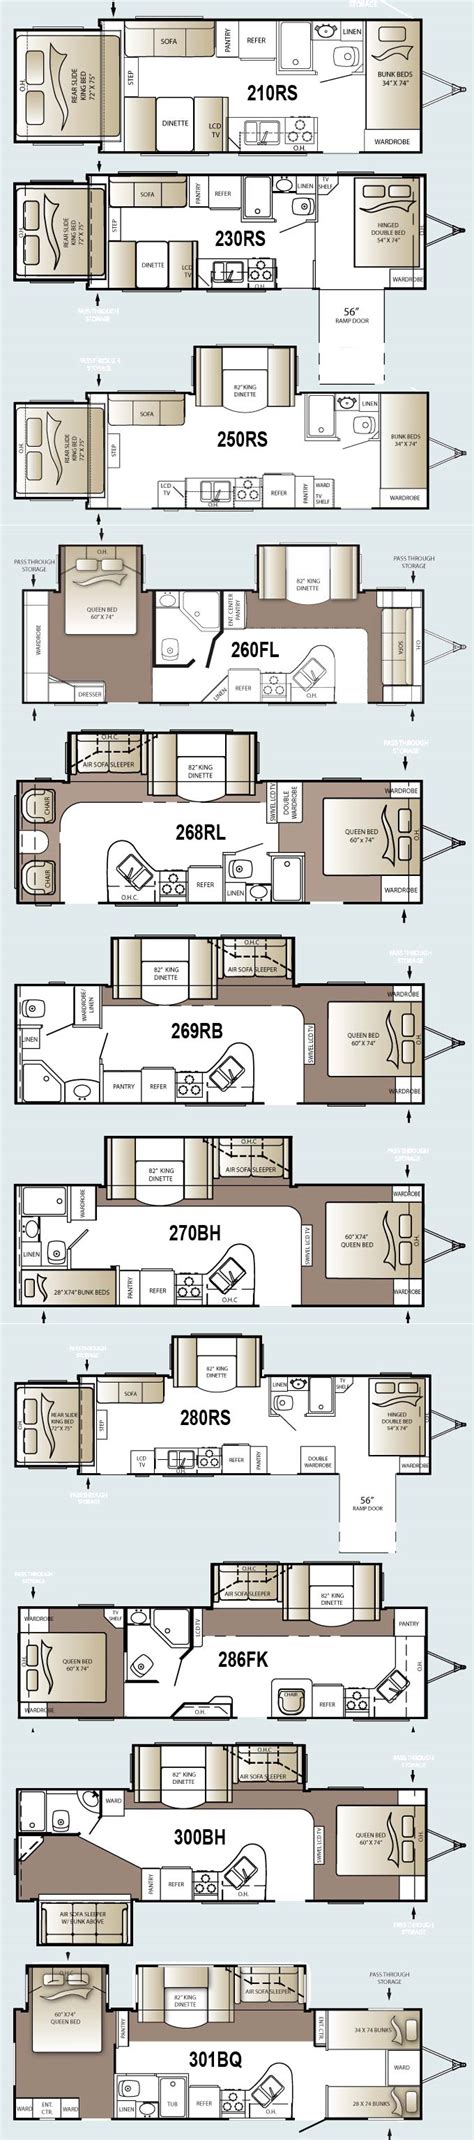 Outback travel trailer floor plans. Luxury Travel Trailers. No recommended Floorplans found. Look inside the 240URS Outback Ultra-Lite and review the specifications, standards and options that come with this model Luxury Travel Trailers. See MSRP and 360 degree layouts. 